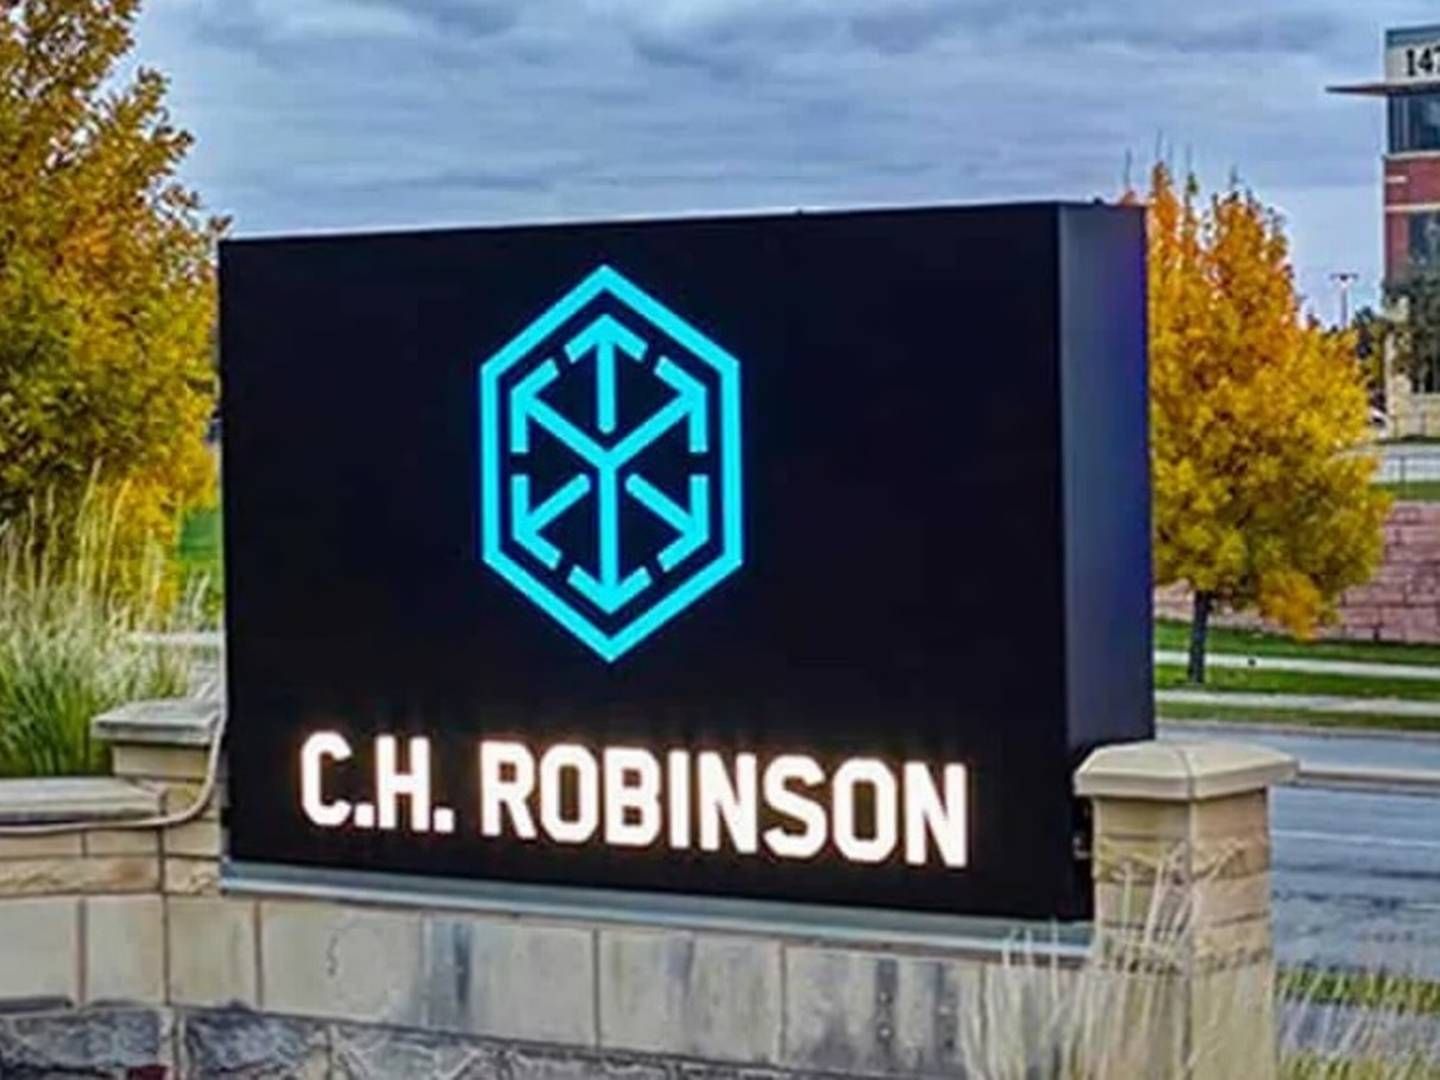 Dave Bozeman is to take over as chief executive officer of major US logistics firm C.H. Robinson. | Foto: C.h. Robinson / Pr